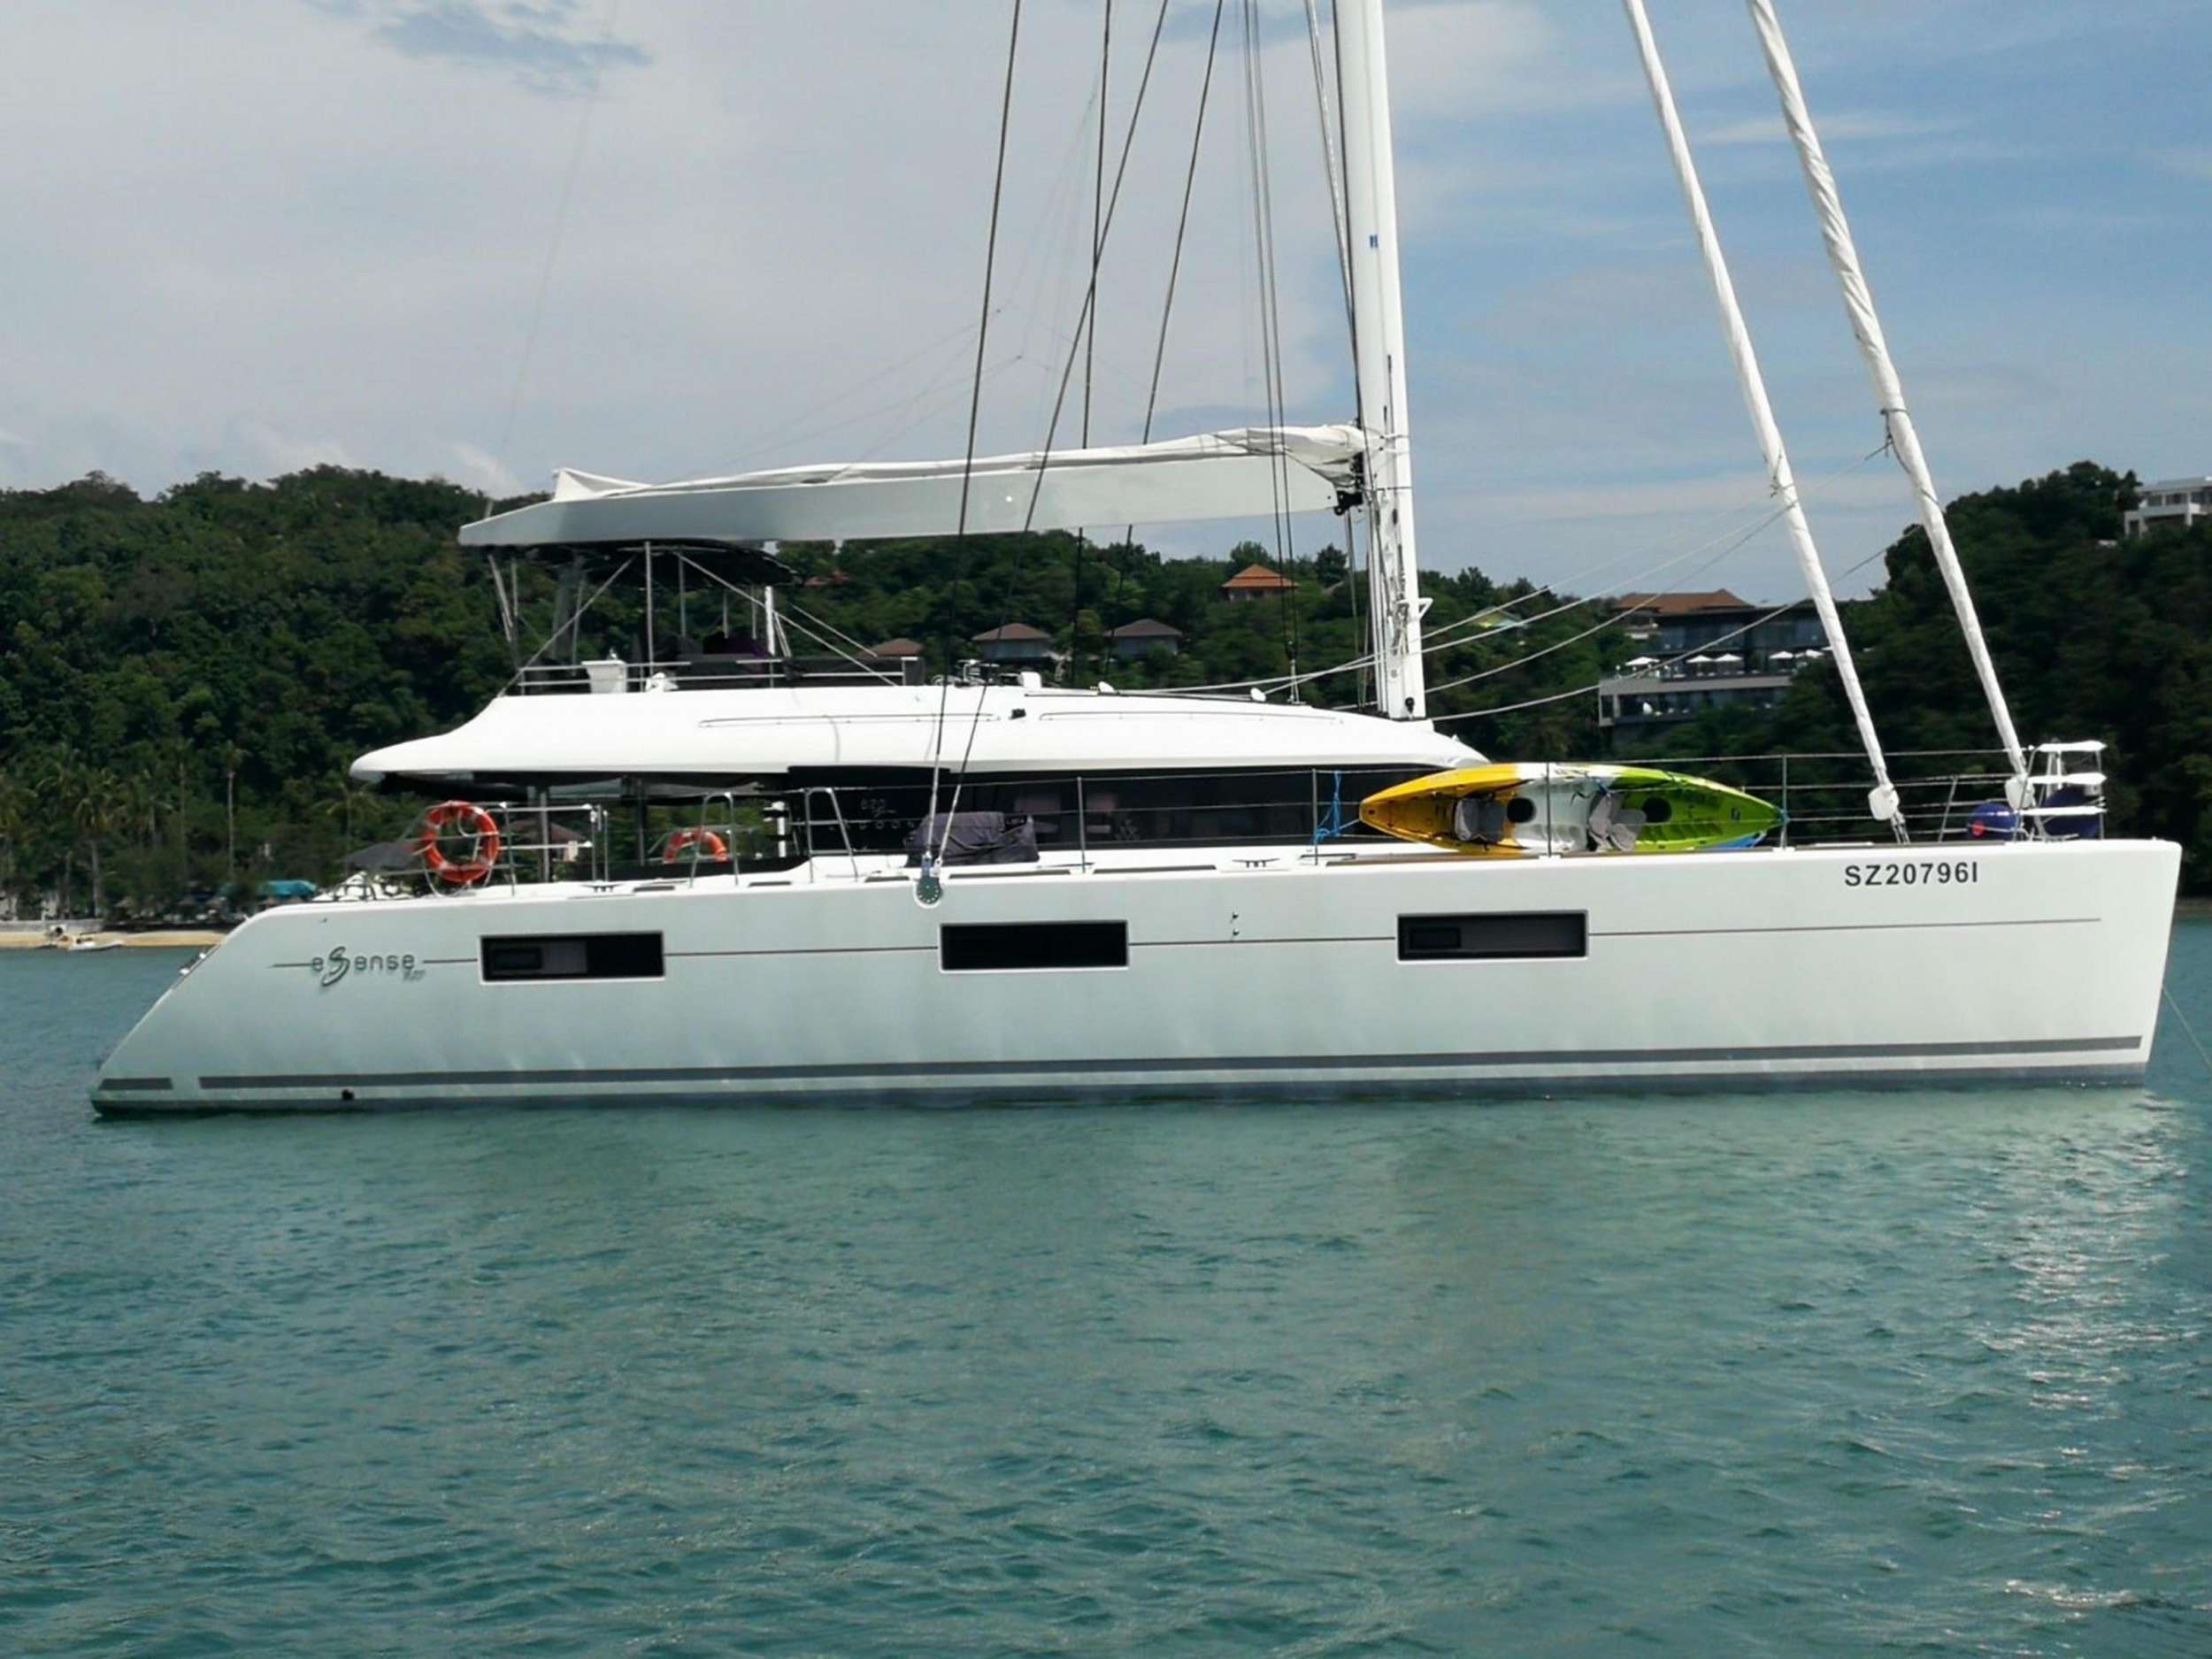 Six Degrees - Catamaran Charter Koh Chang & Boat hire in SE Asia 1